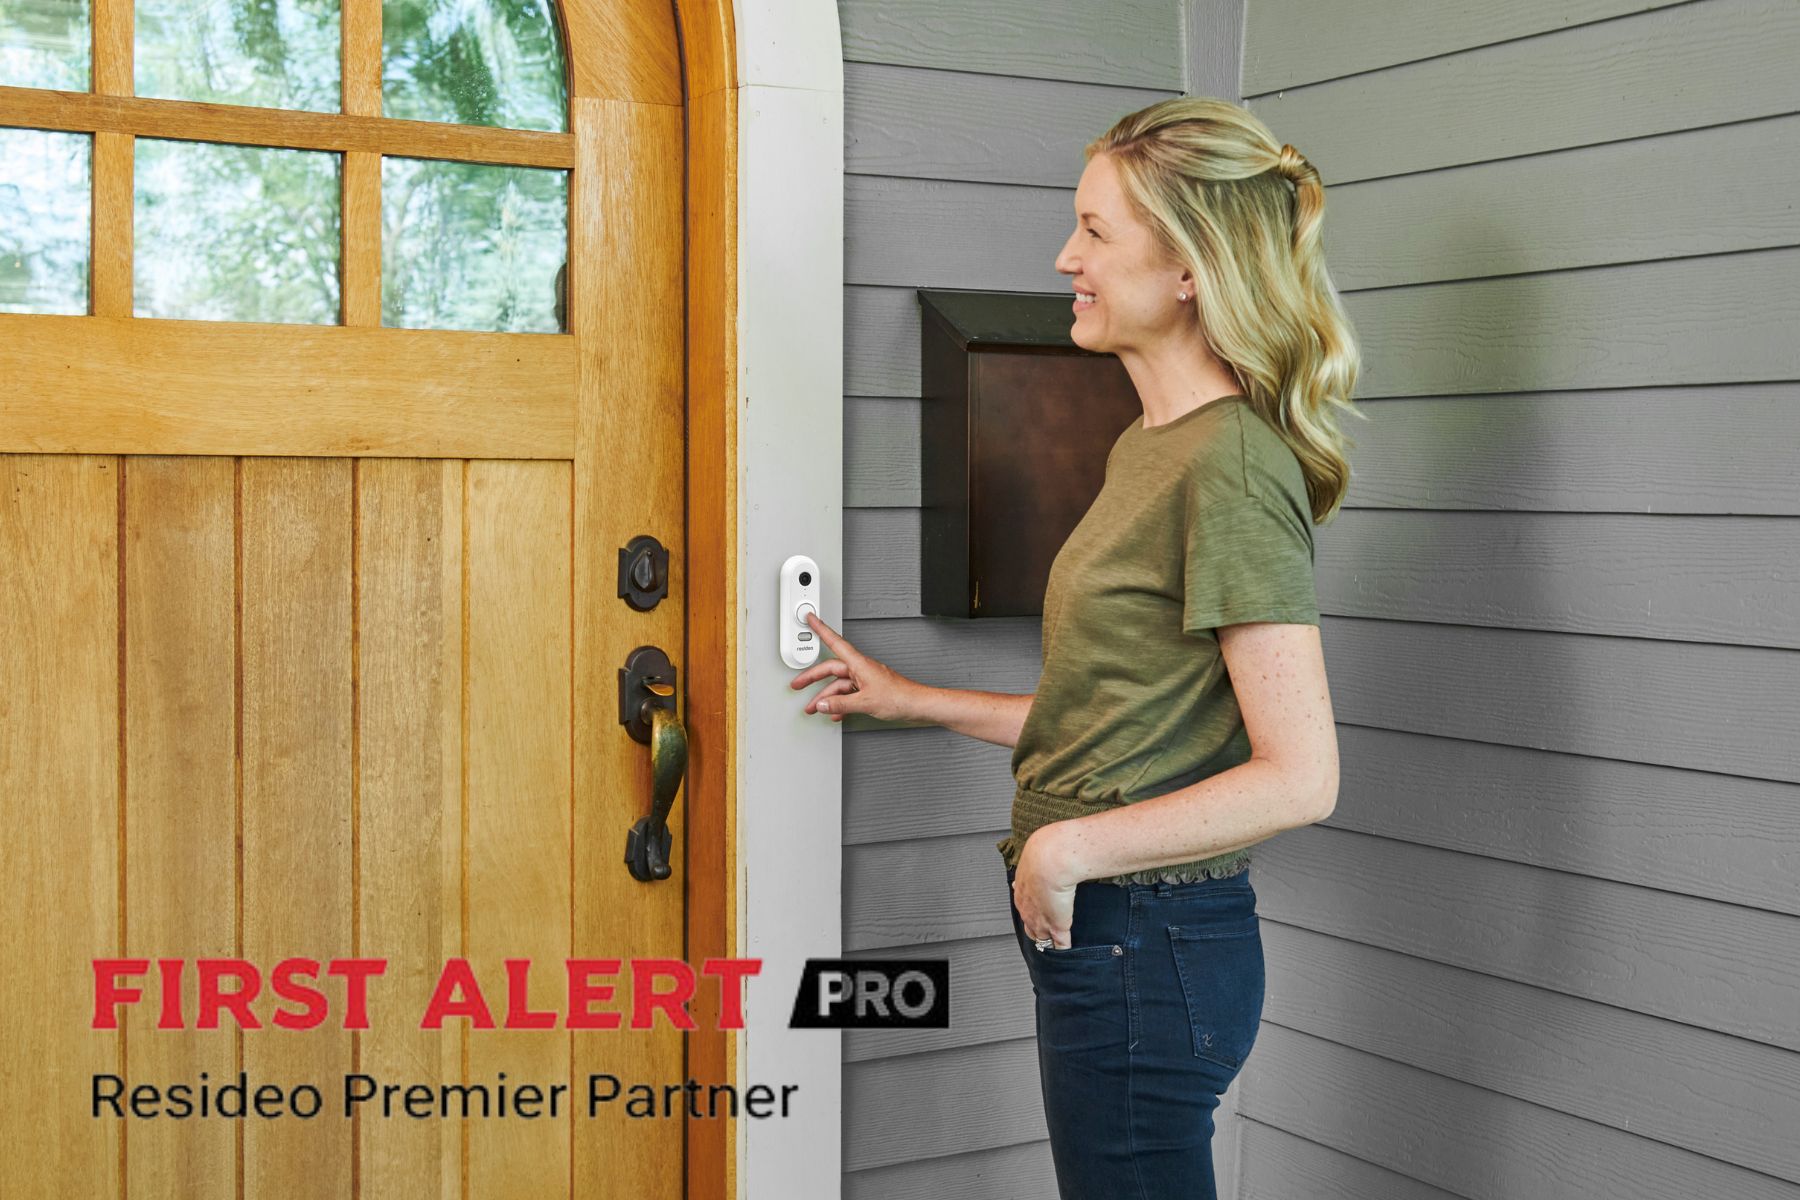 A woman at the front door of a home pressing the call button on a video doorbell